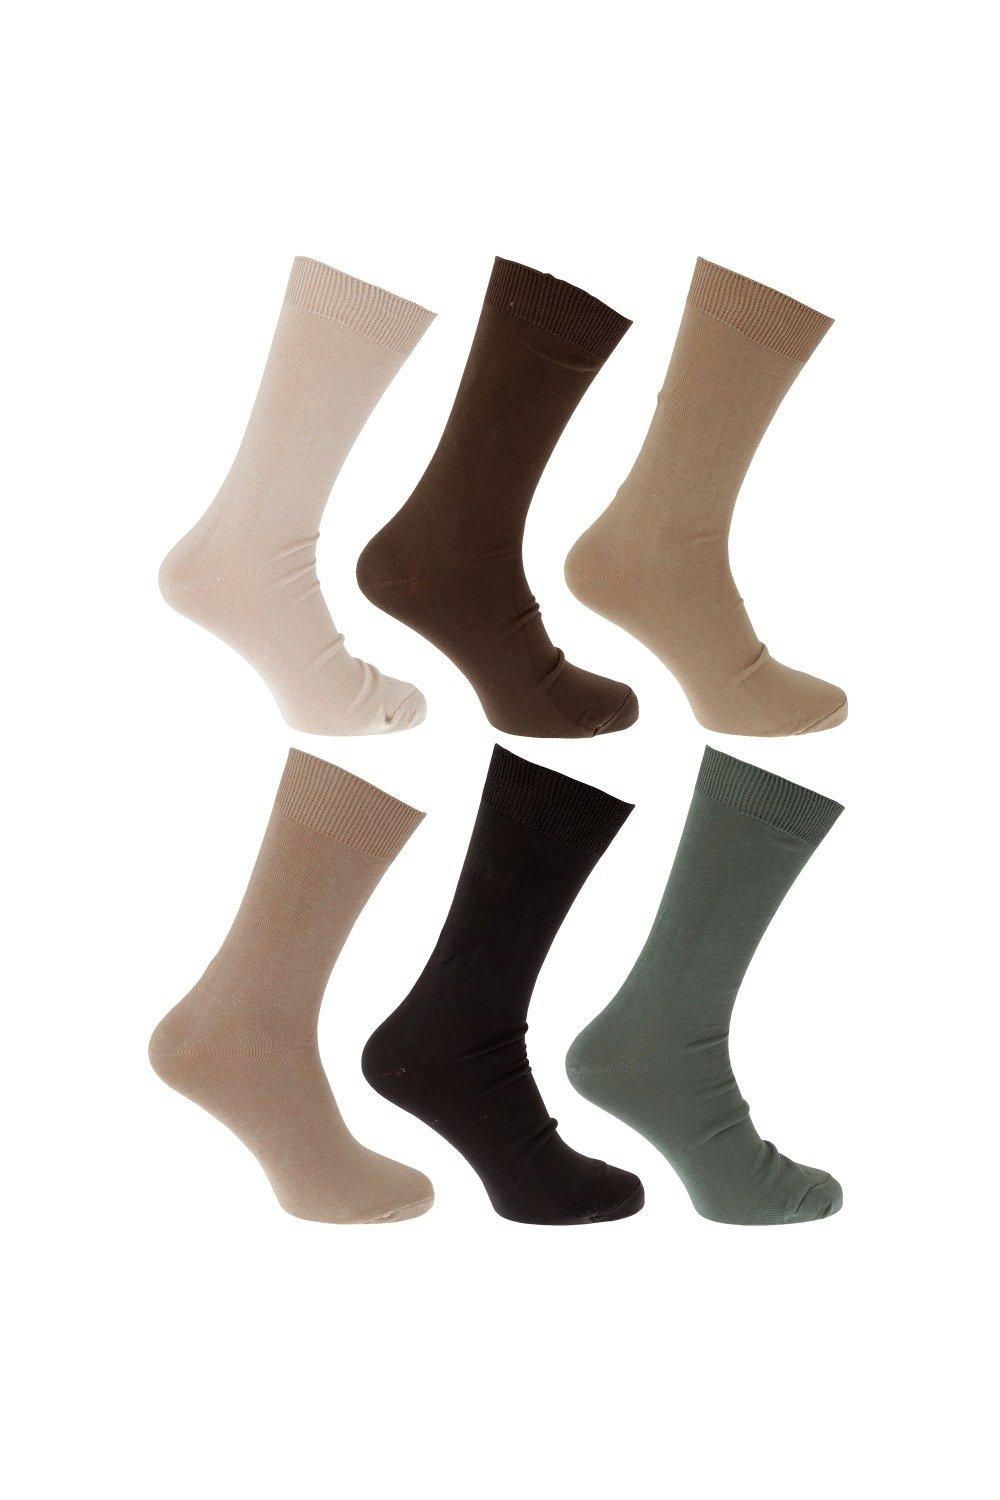 100% Cotton Plain Work/Casual Socks (Pack Of 6)